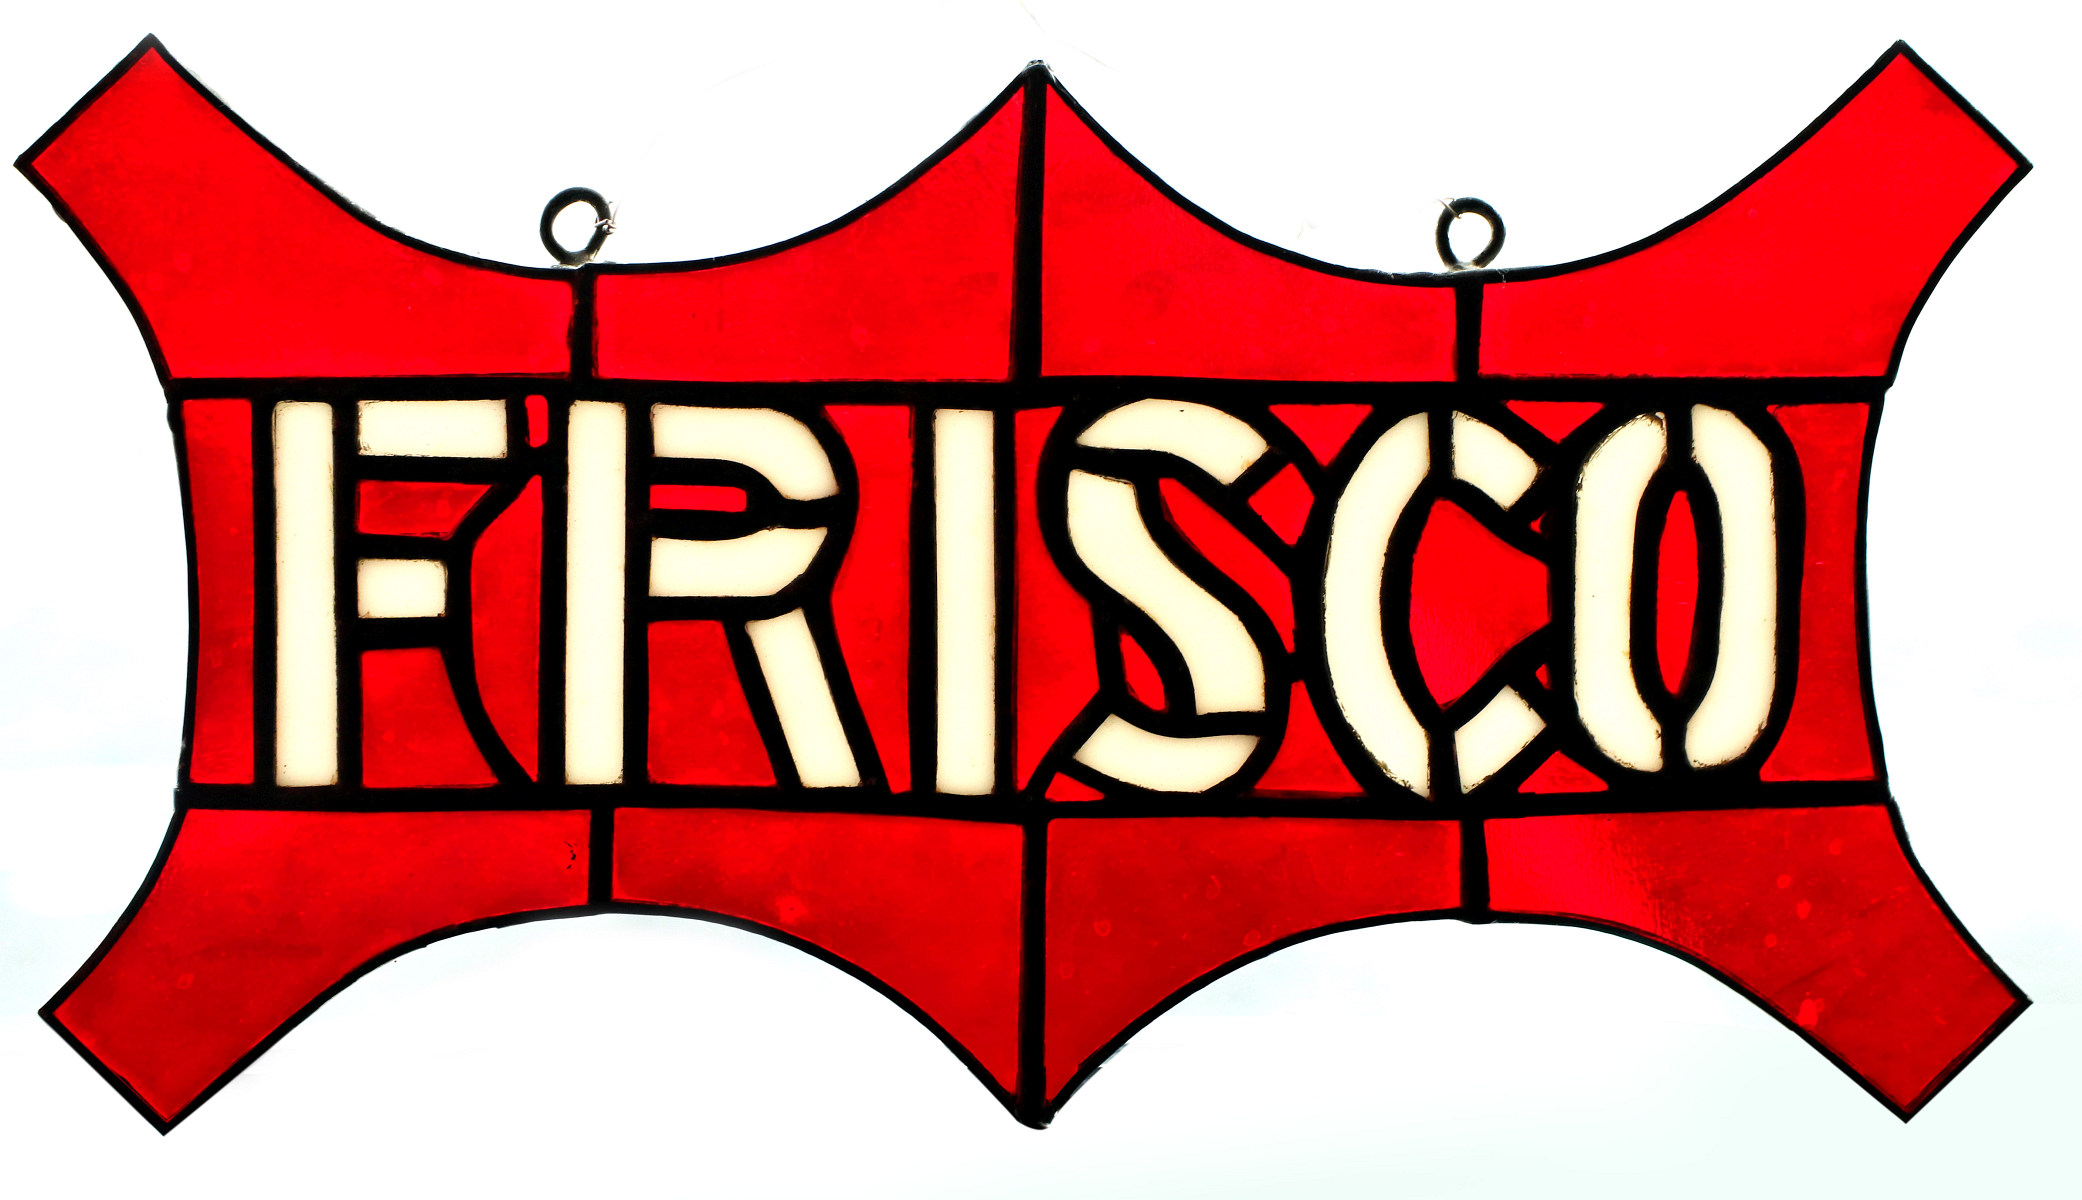 A STAINED AND LEADED GLASS PANEL WITH FRISCO LOGO